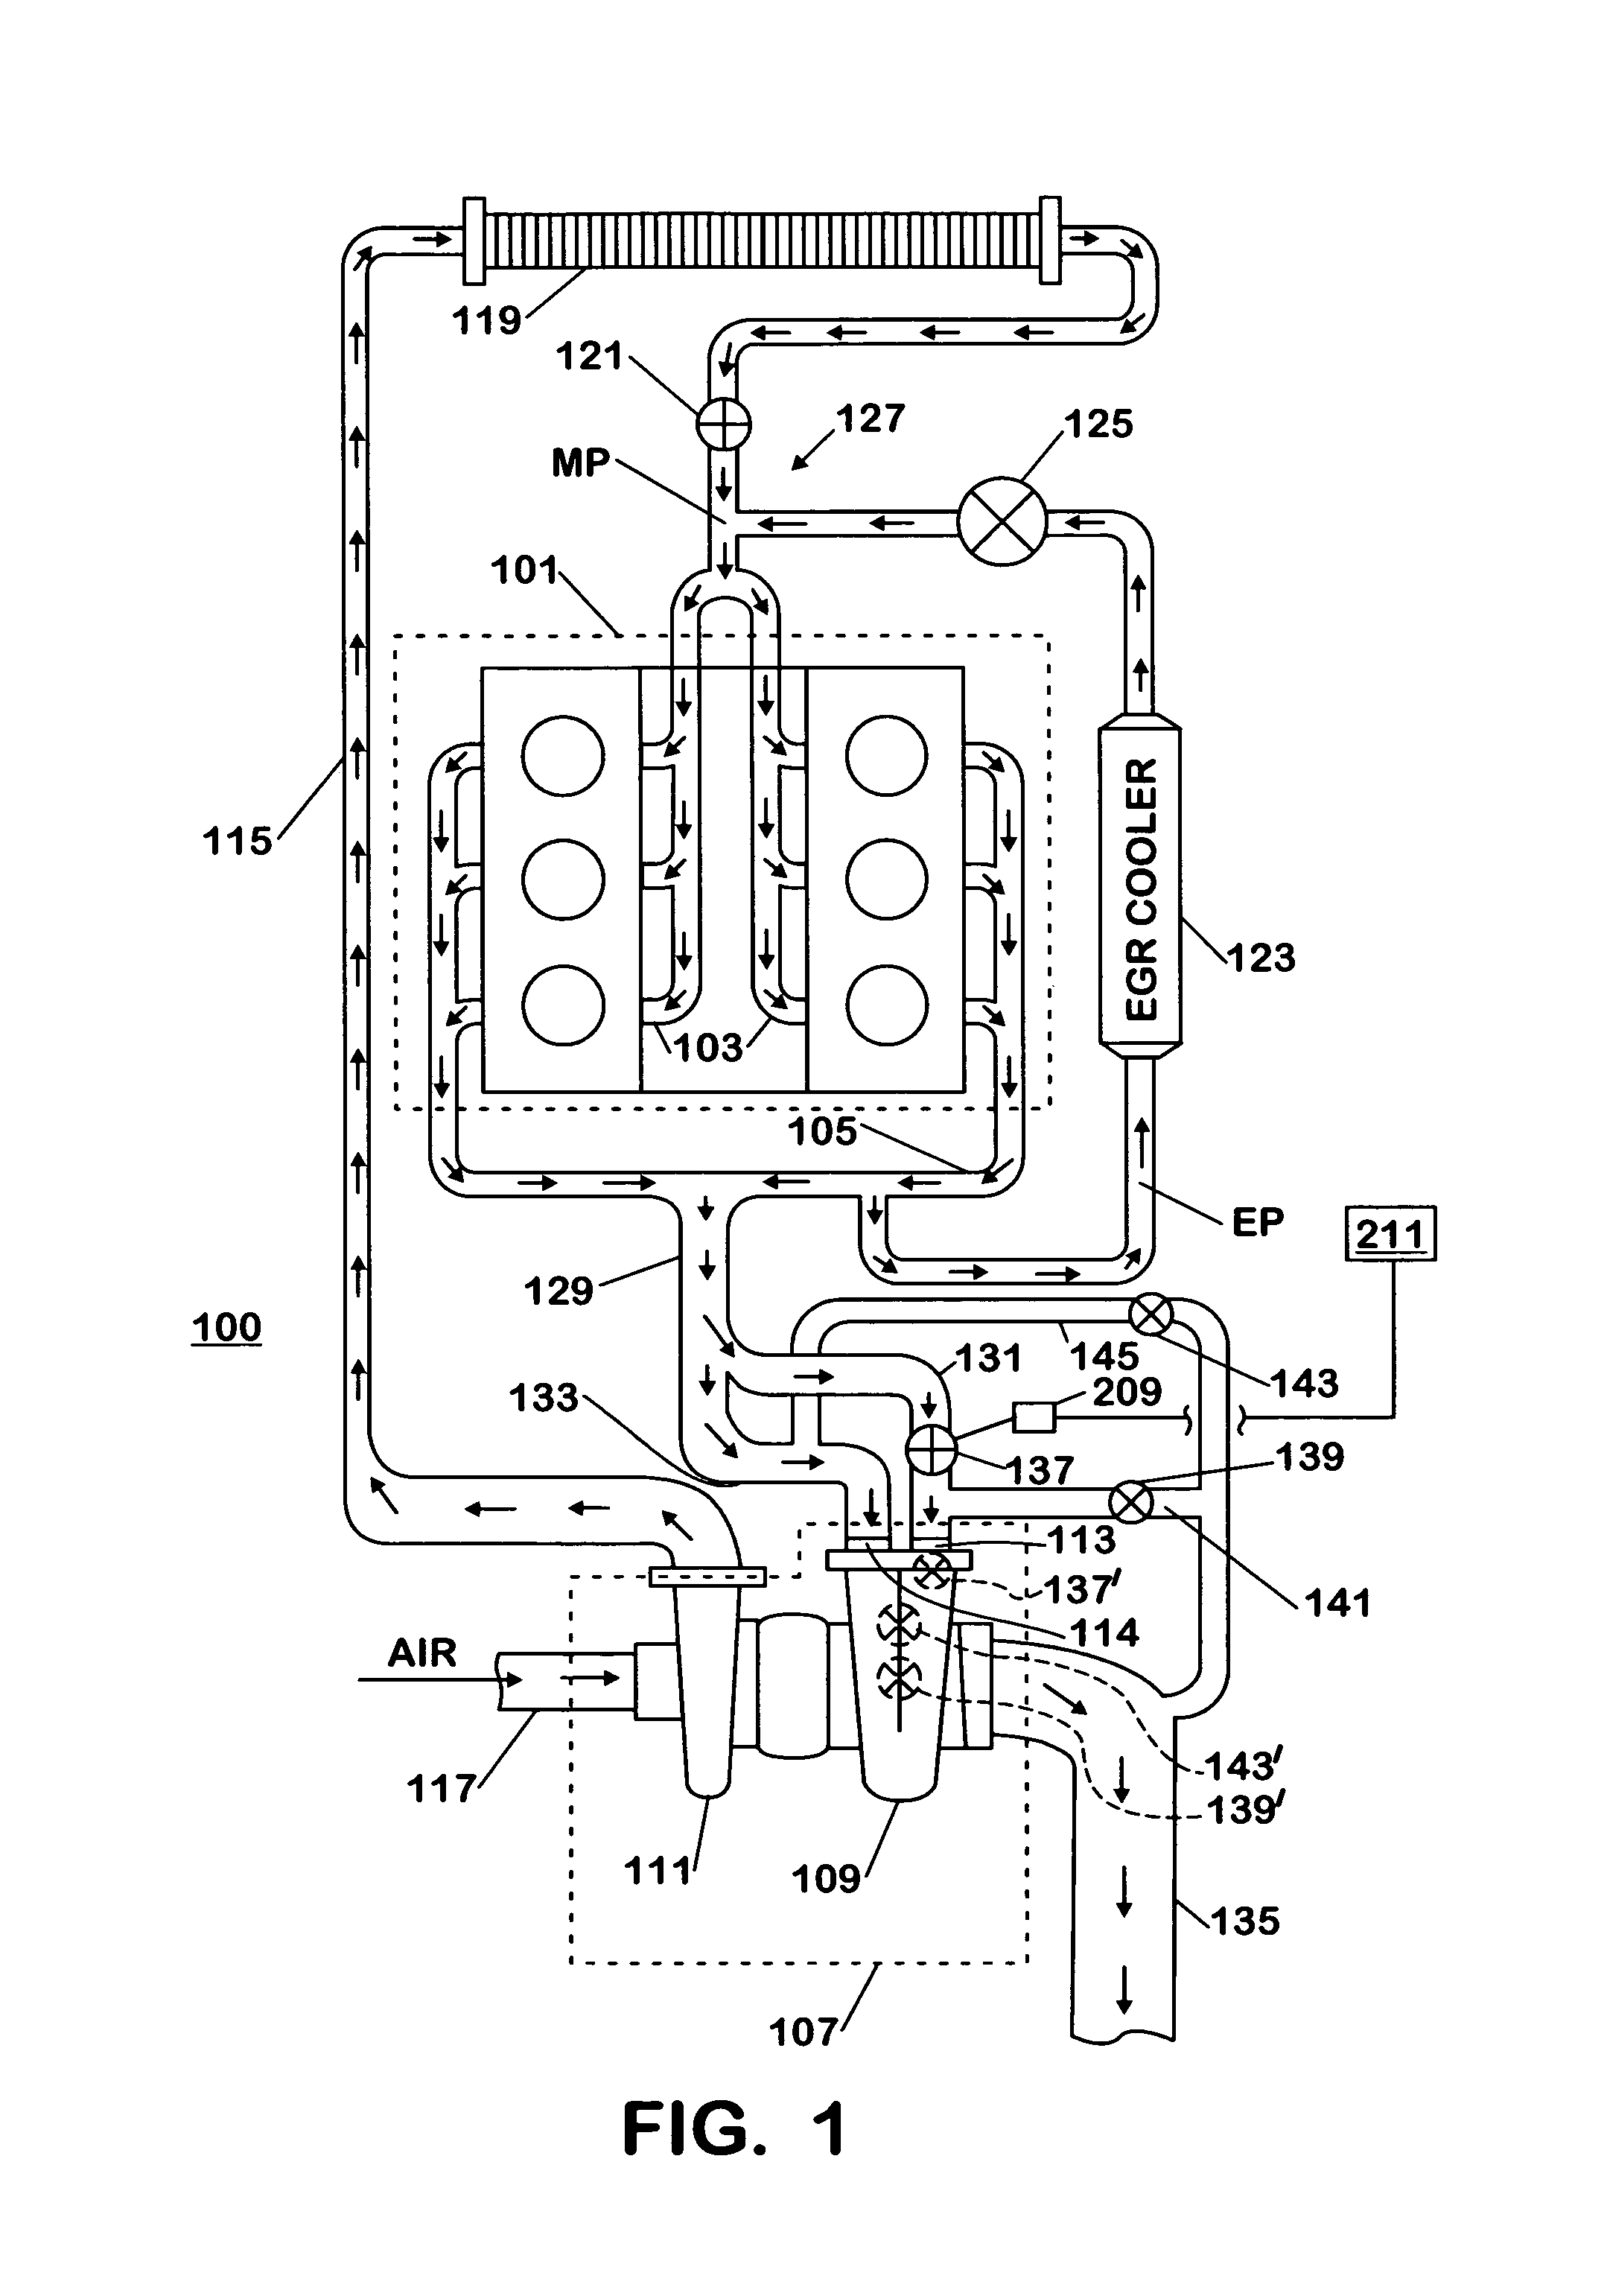 Exhaust gas throttle for divided turbine housing turbocharger